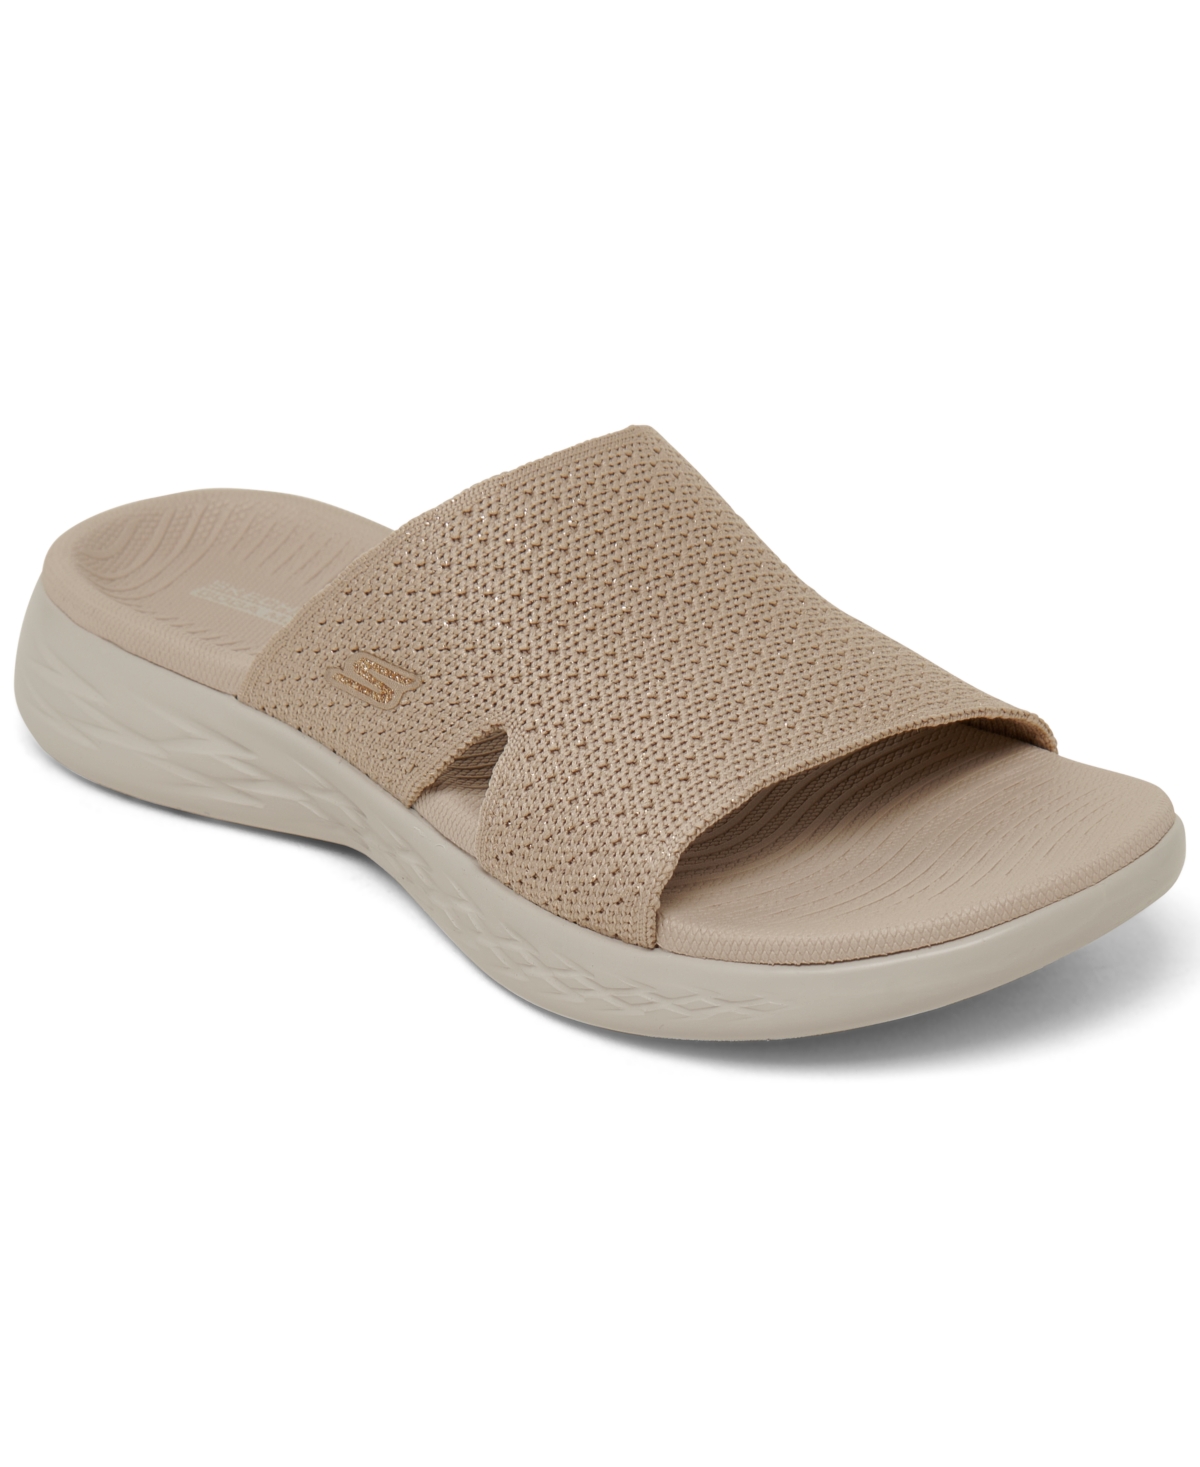 Women's On-the-go 600 - Adore Slide Sandals from Finish Line - Taupe